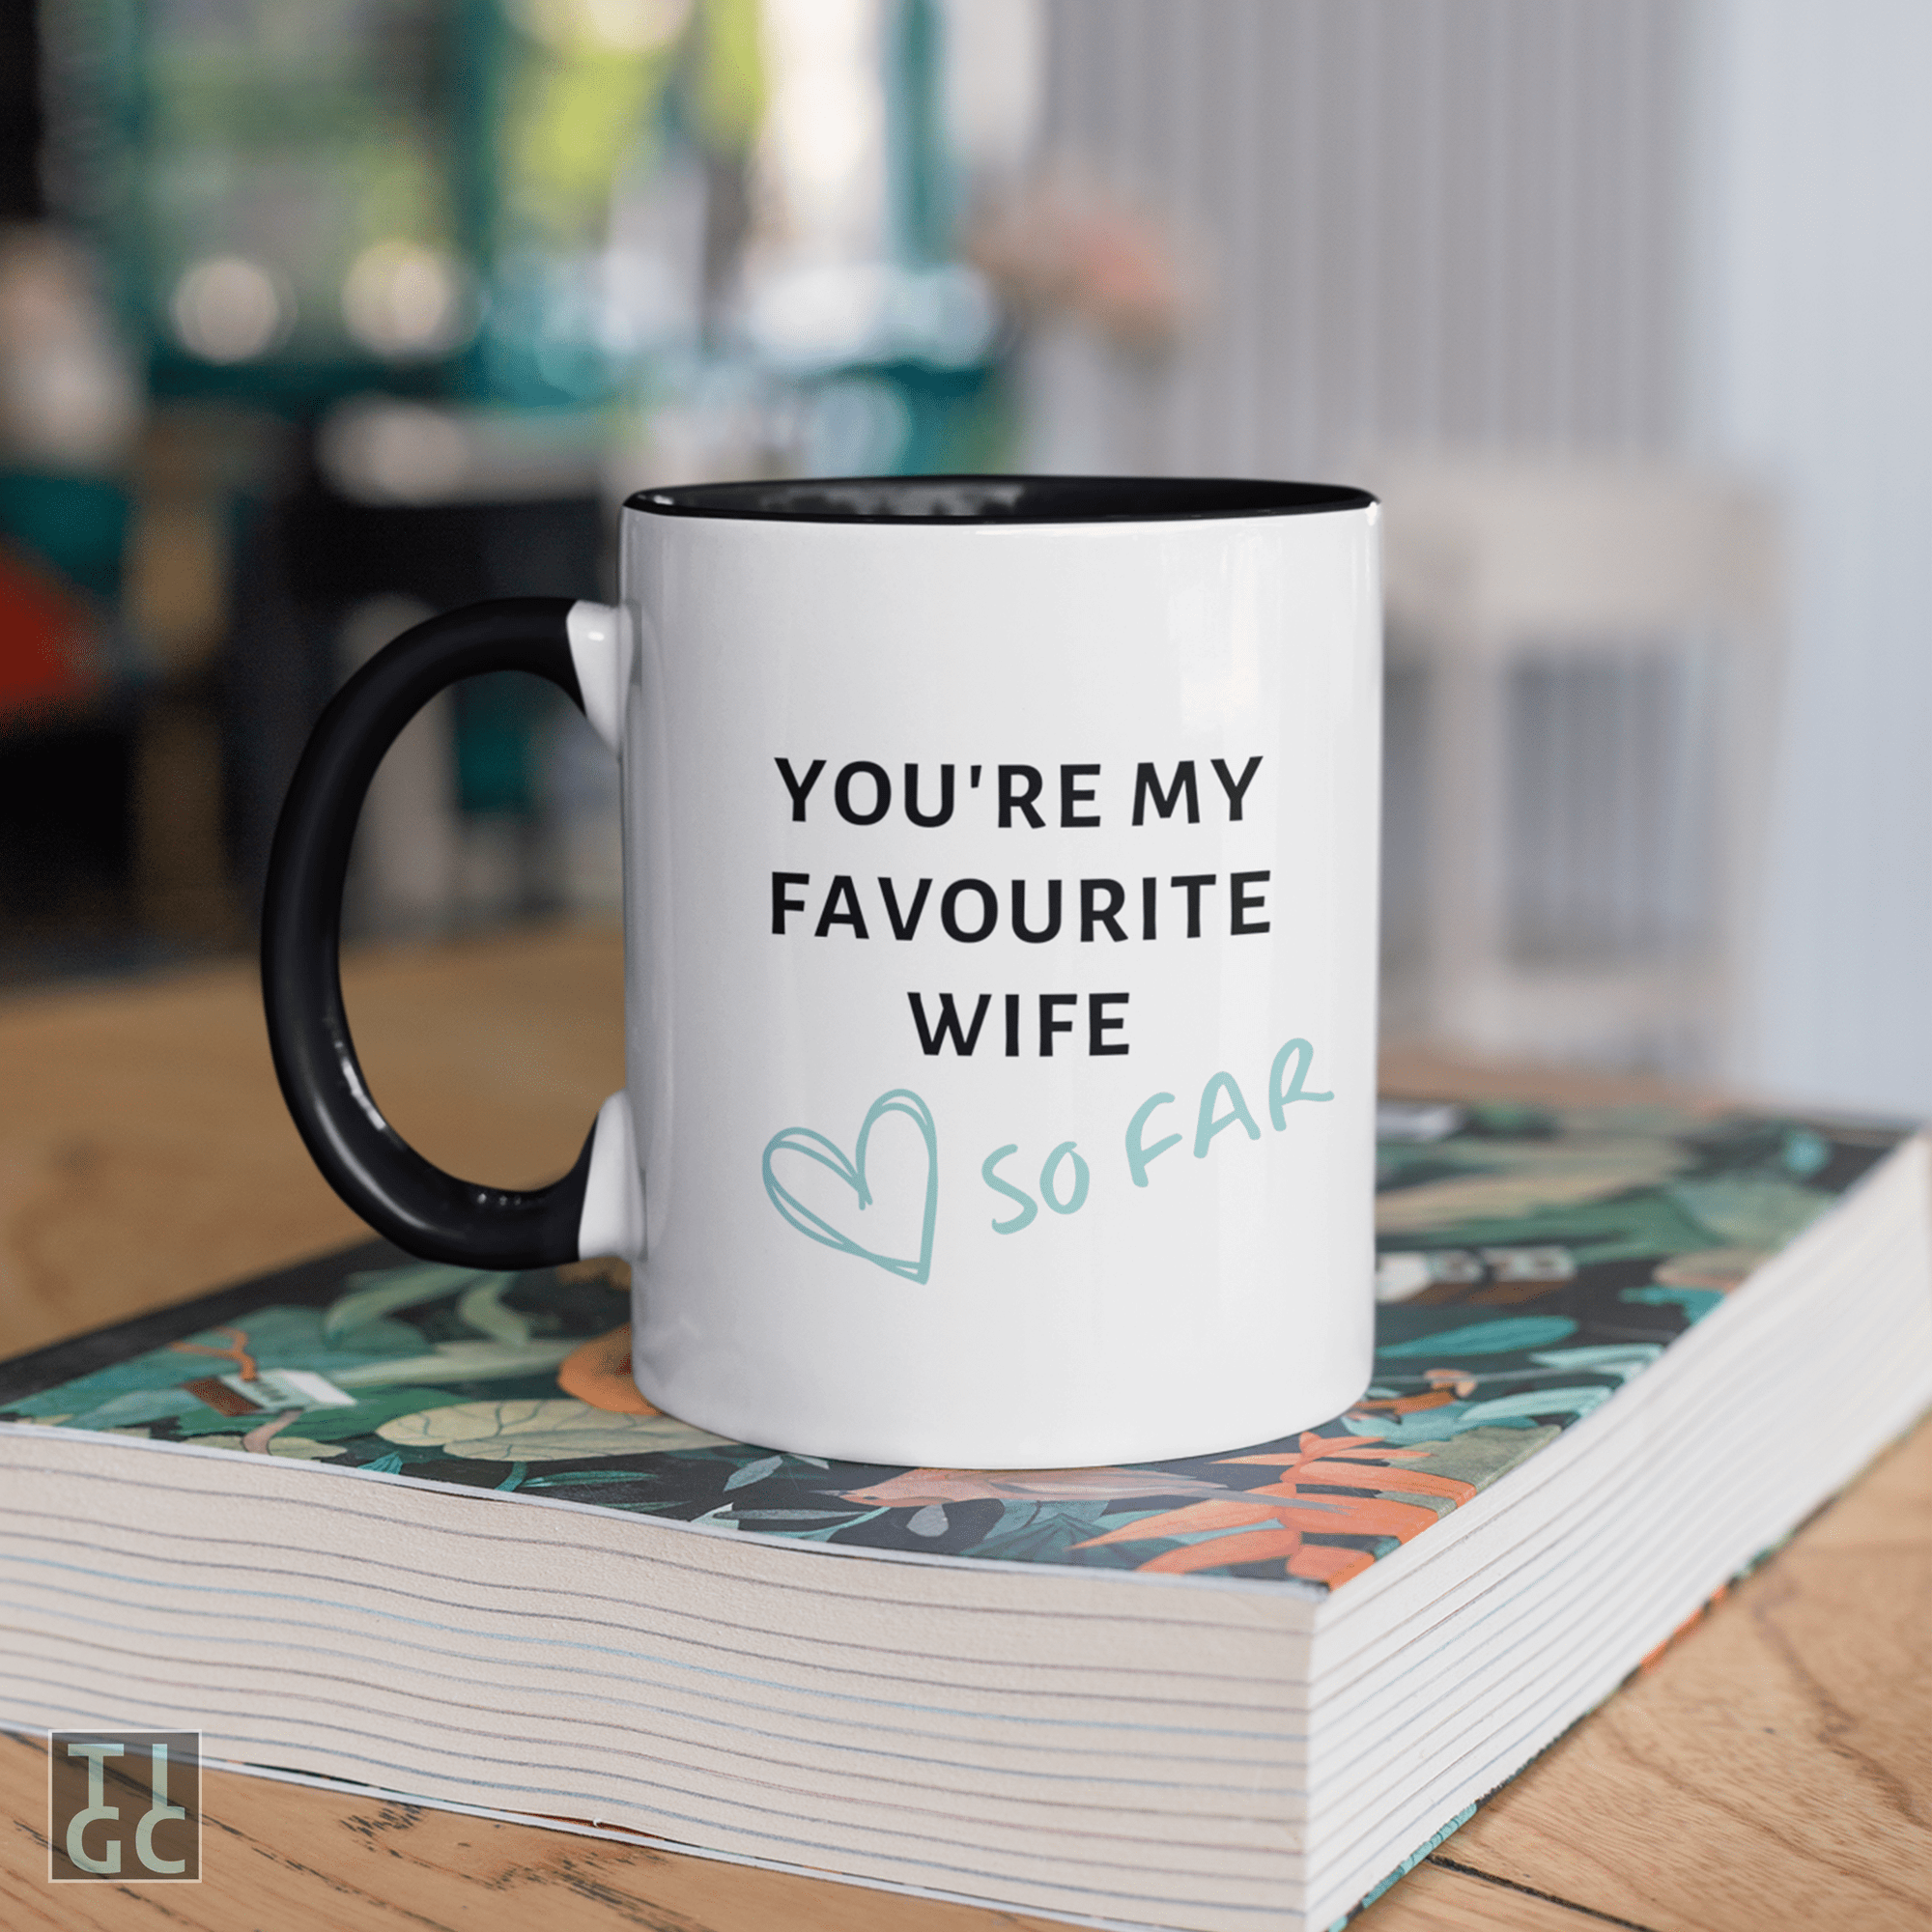 TIGC The Inappropriate Gift Co You are my favourite wife so far mug